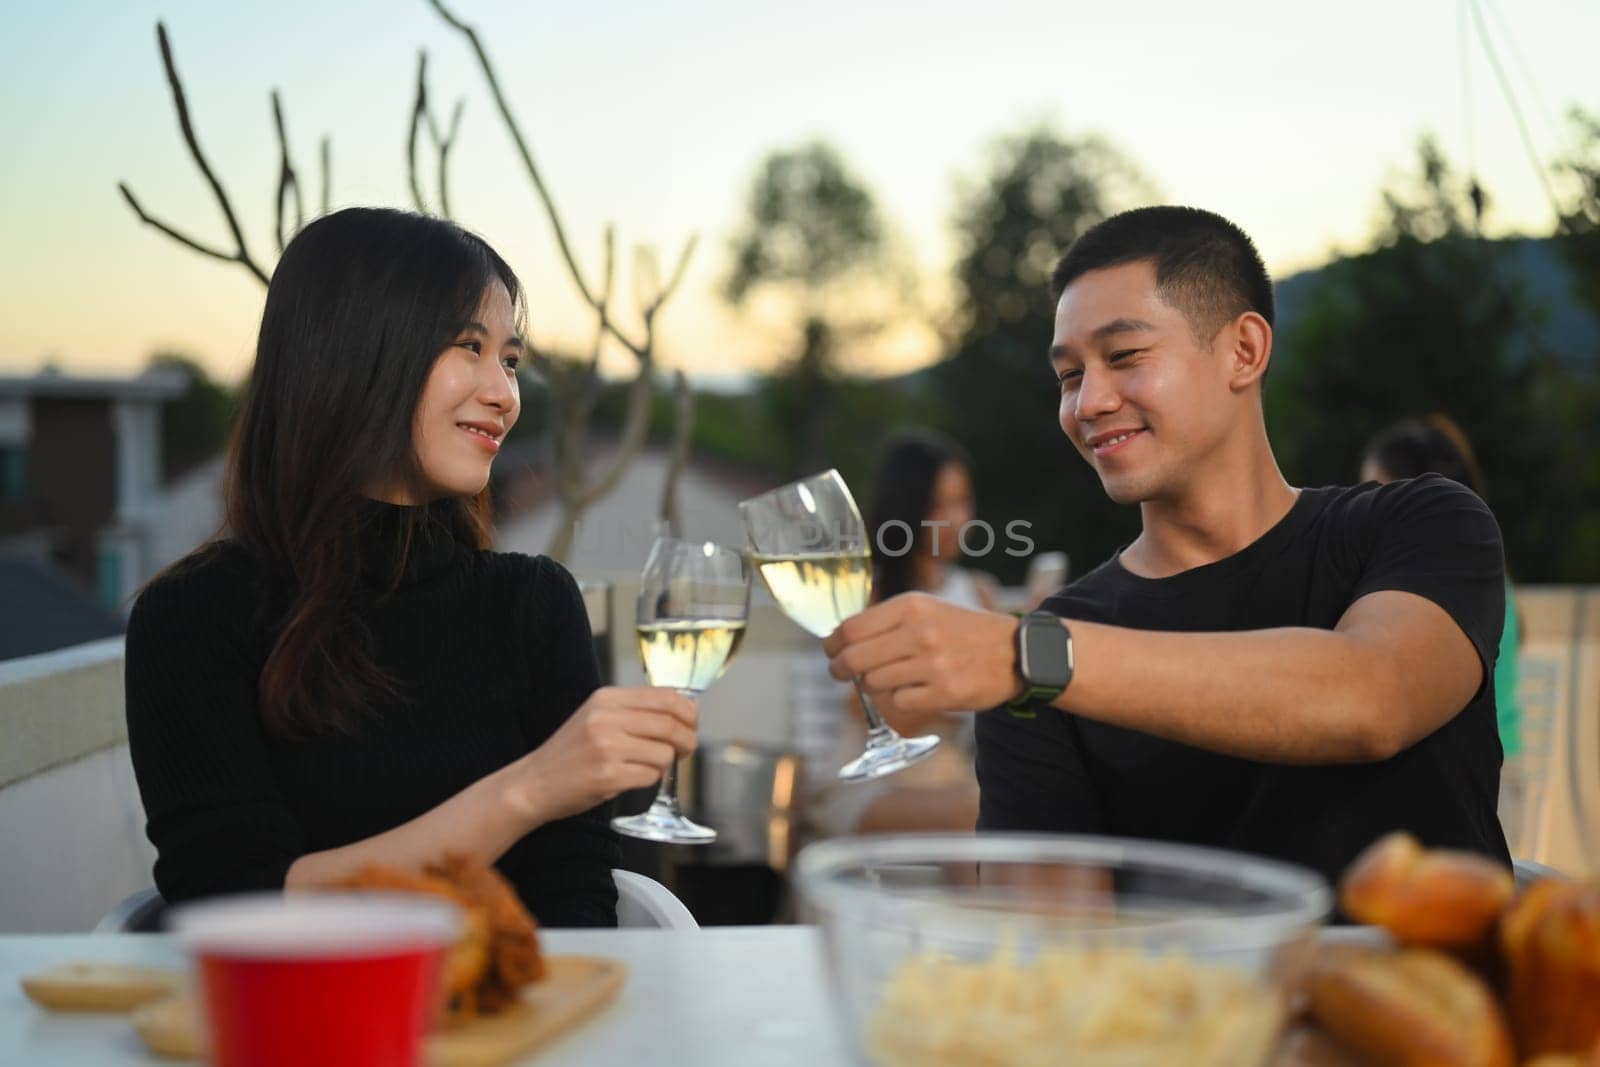 Young Asian couple having fun at a summertime rooftop party during sunset